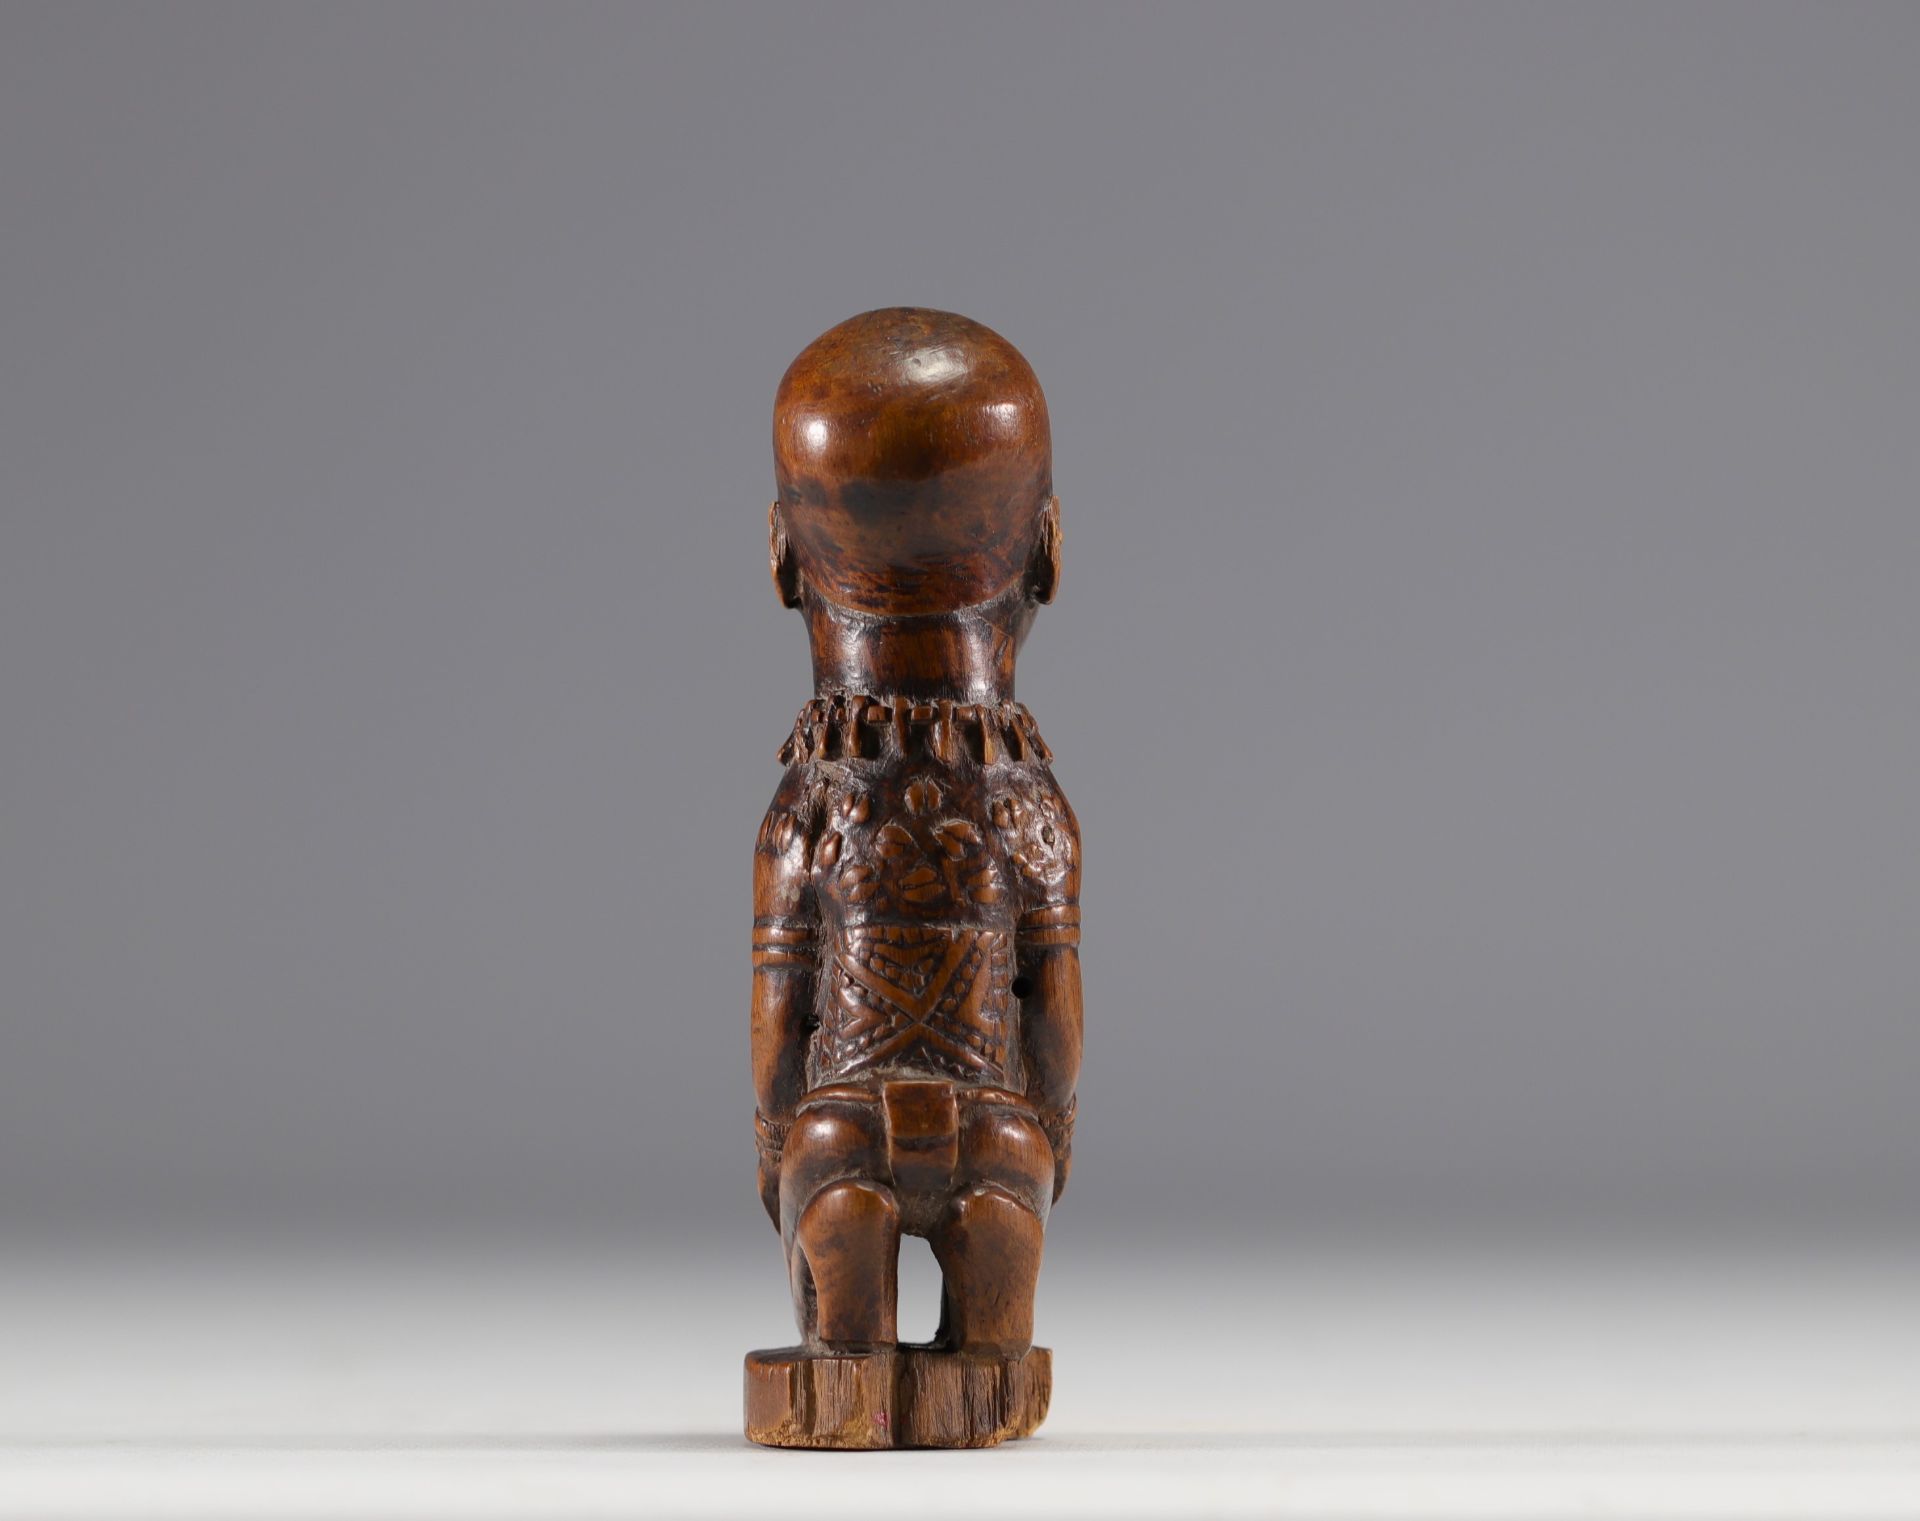 Rare Bas-Congo statuette in carved wood with scarification marks and nails from the 1900s - Image 2 of 6